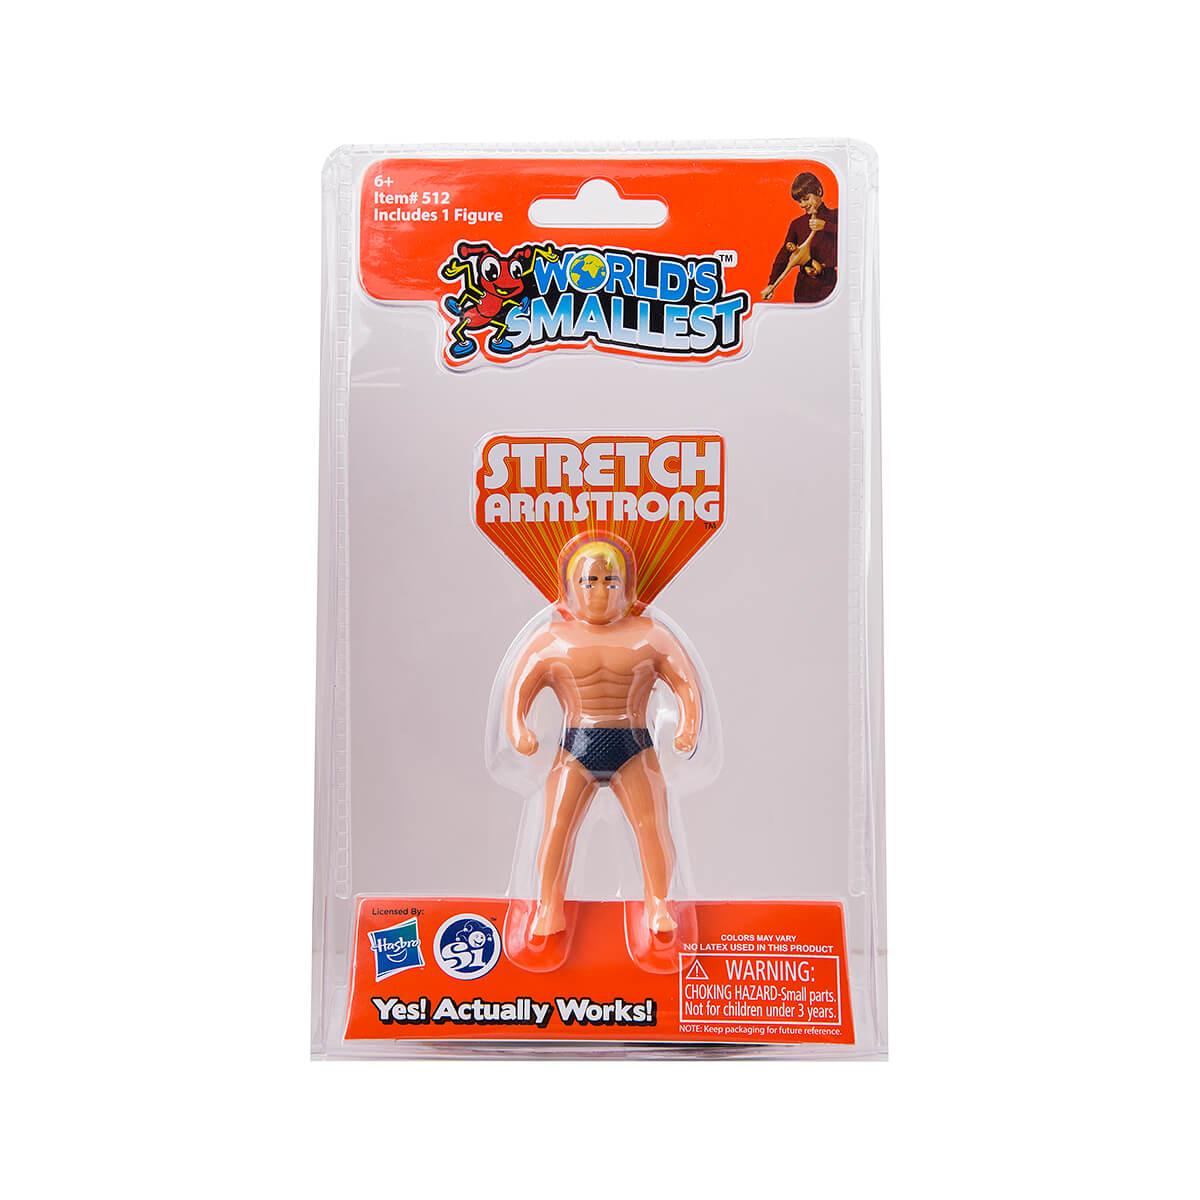 Toy World's Smallest Stretch Armstrong-hotRAGS.com